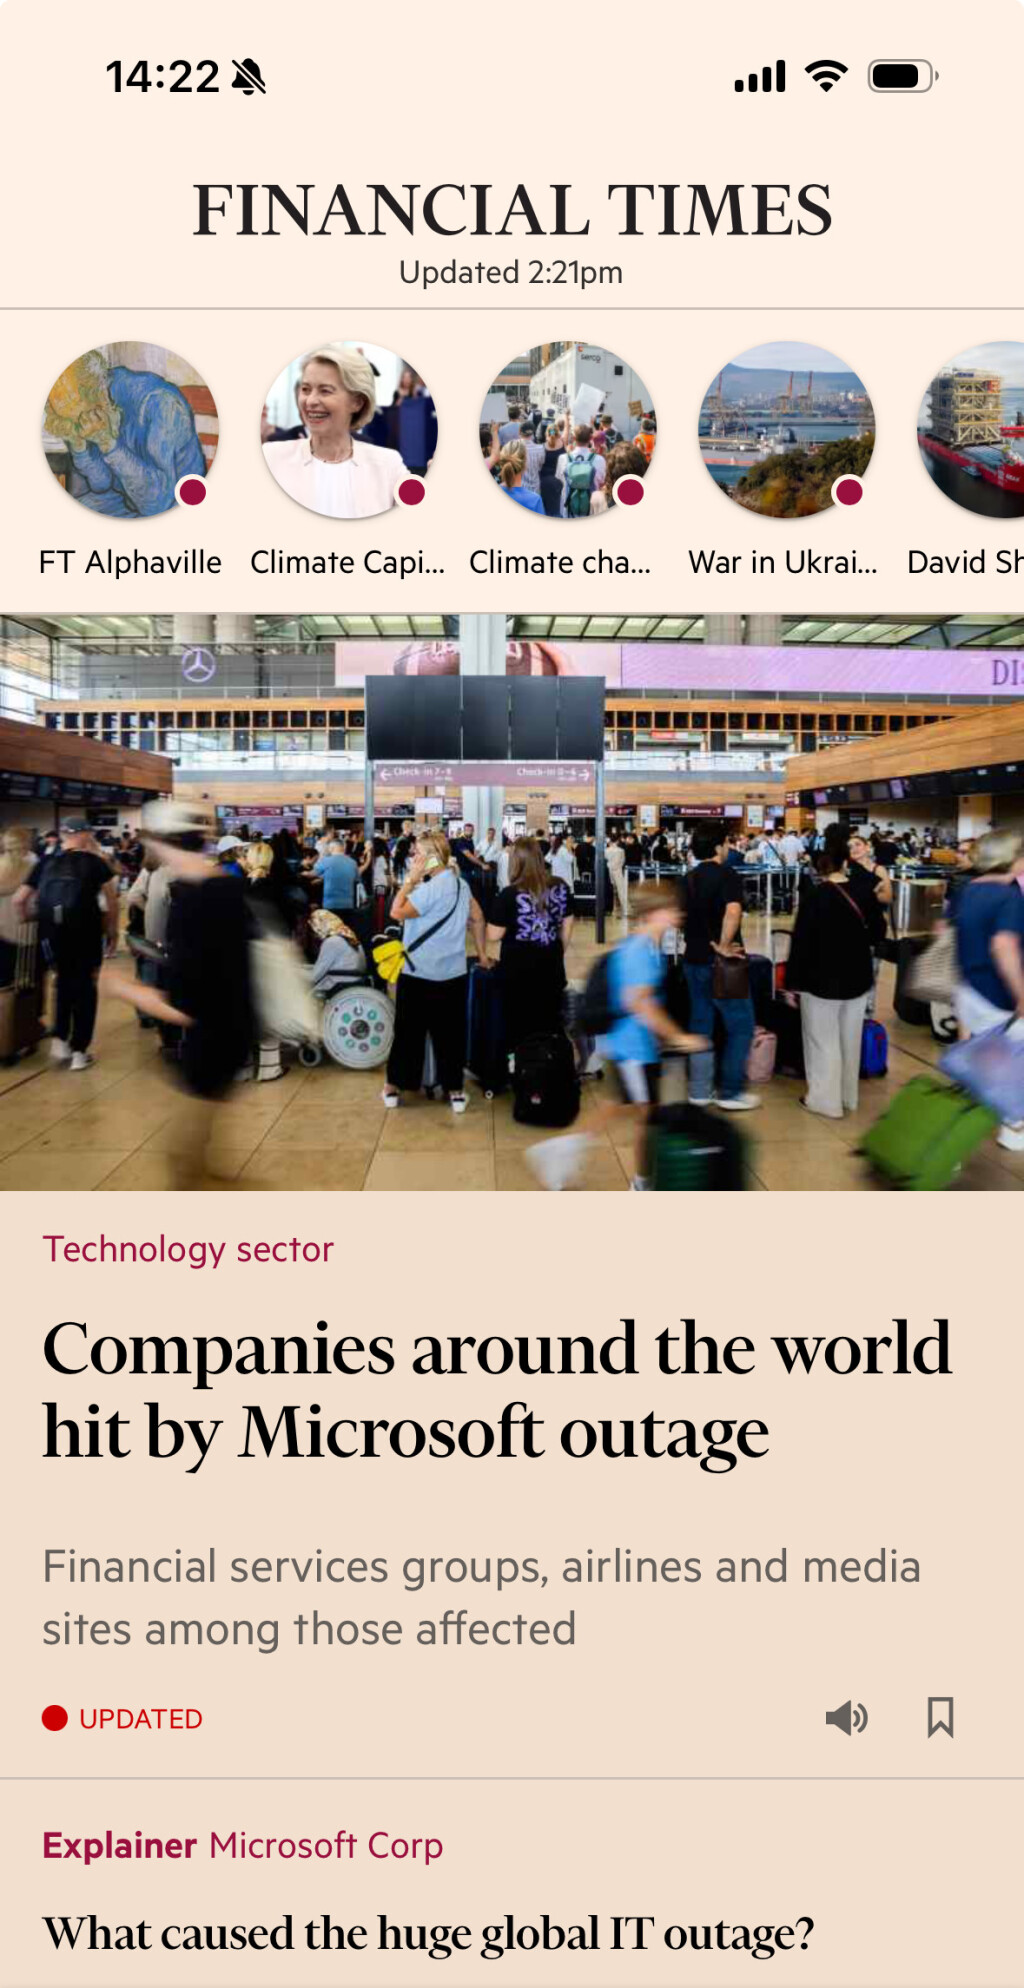 The financial times front page blaming the IT outage on Microsoft